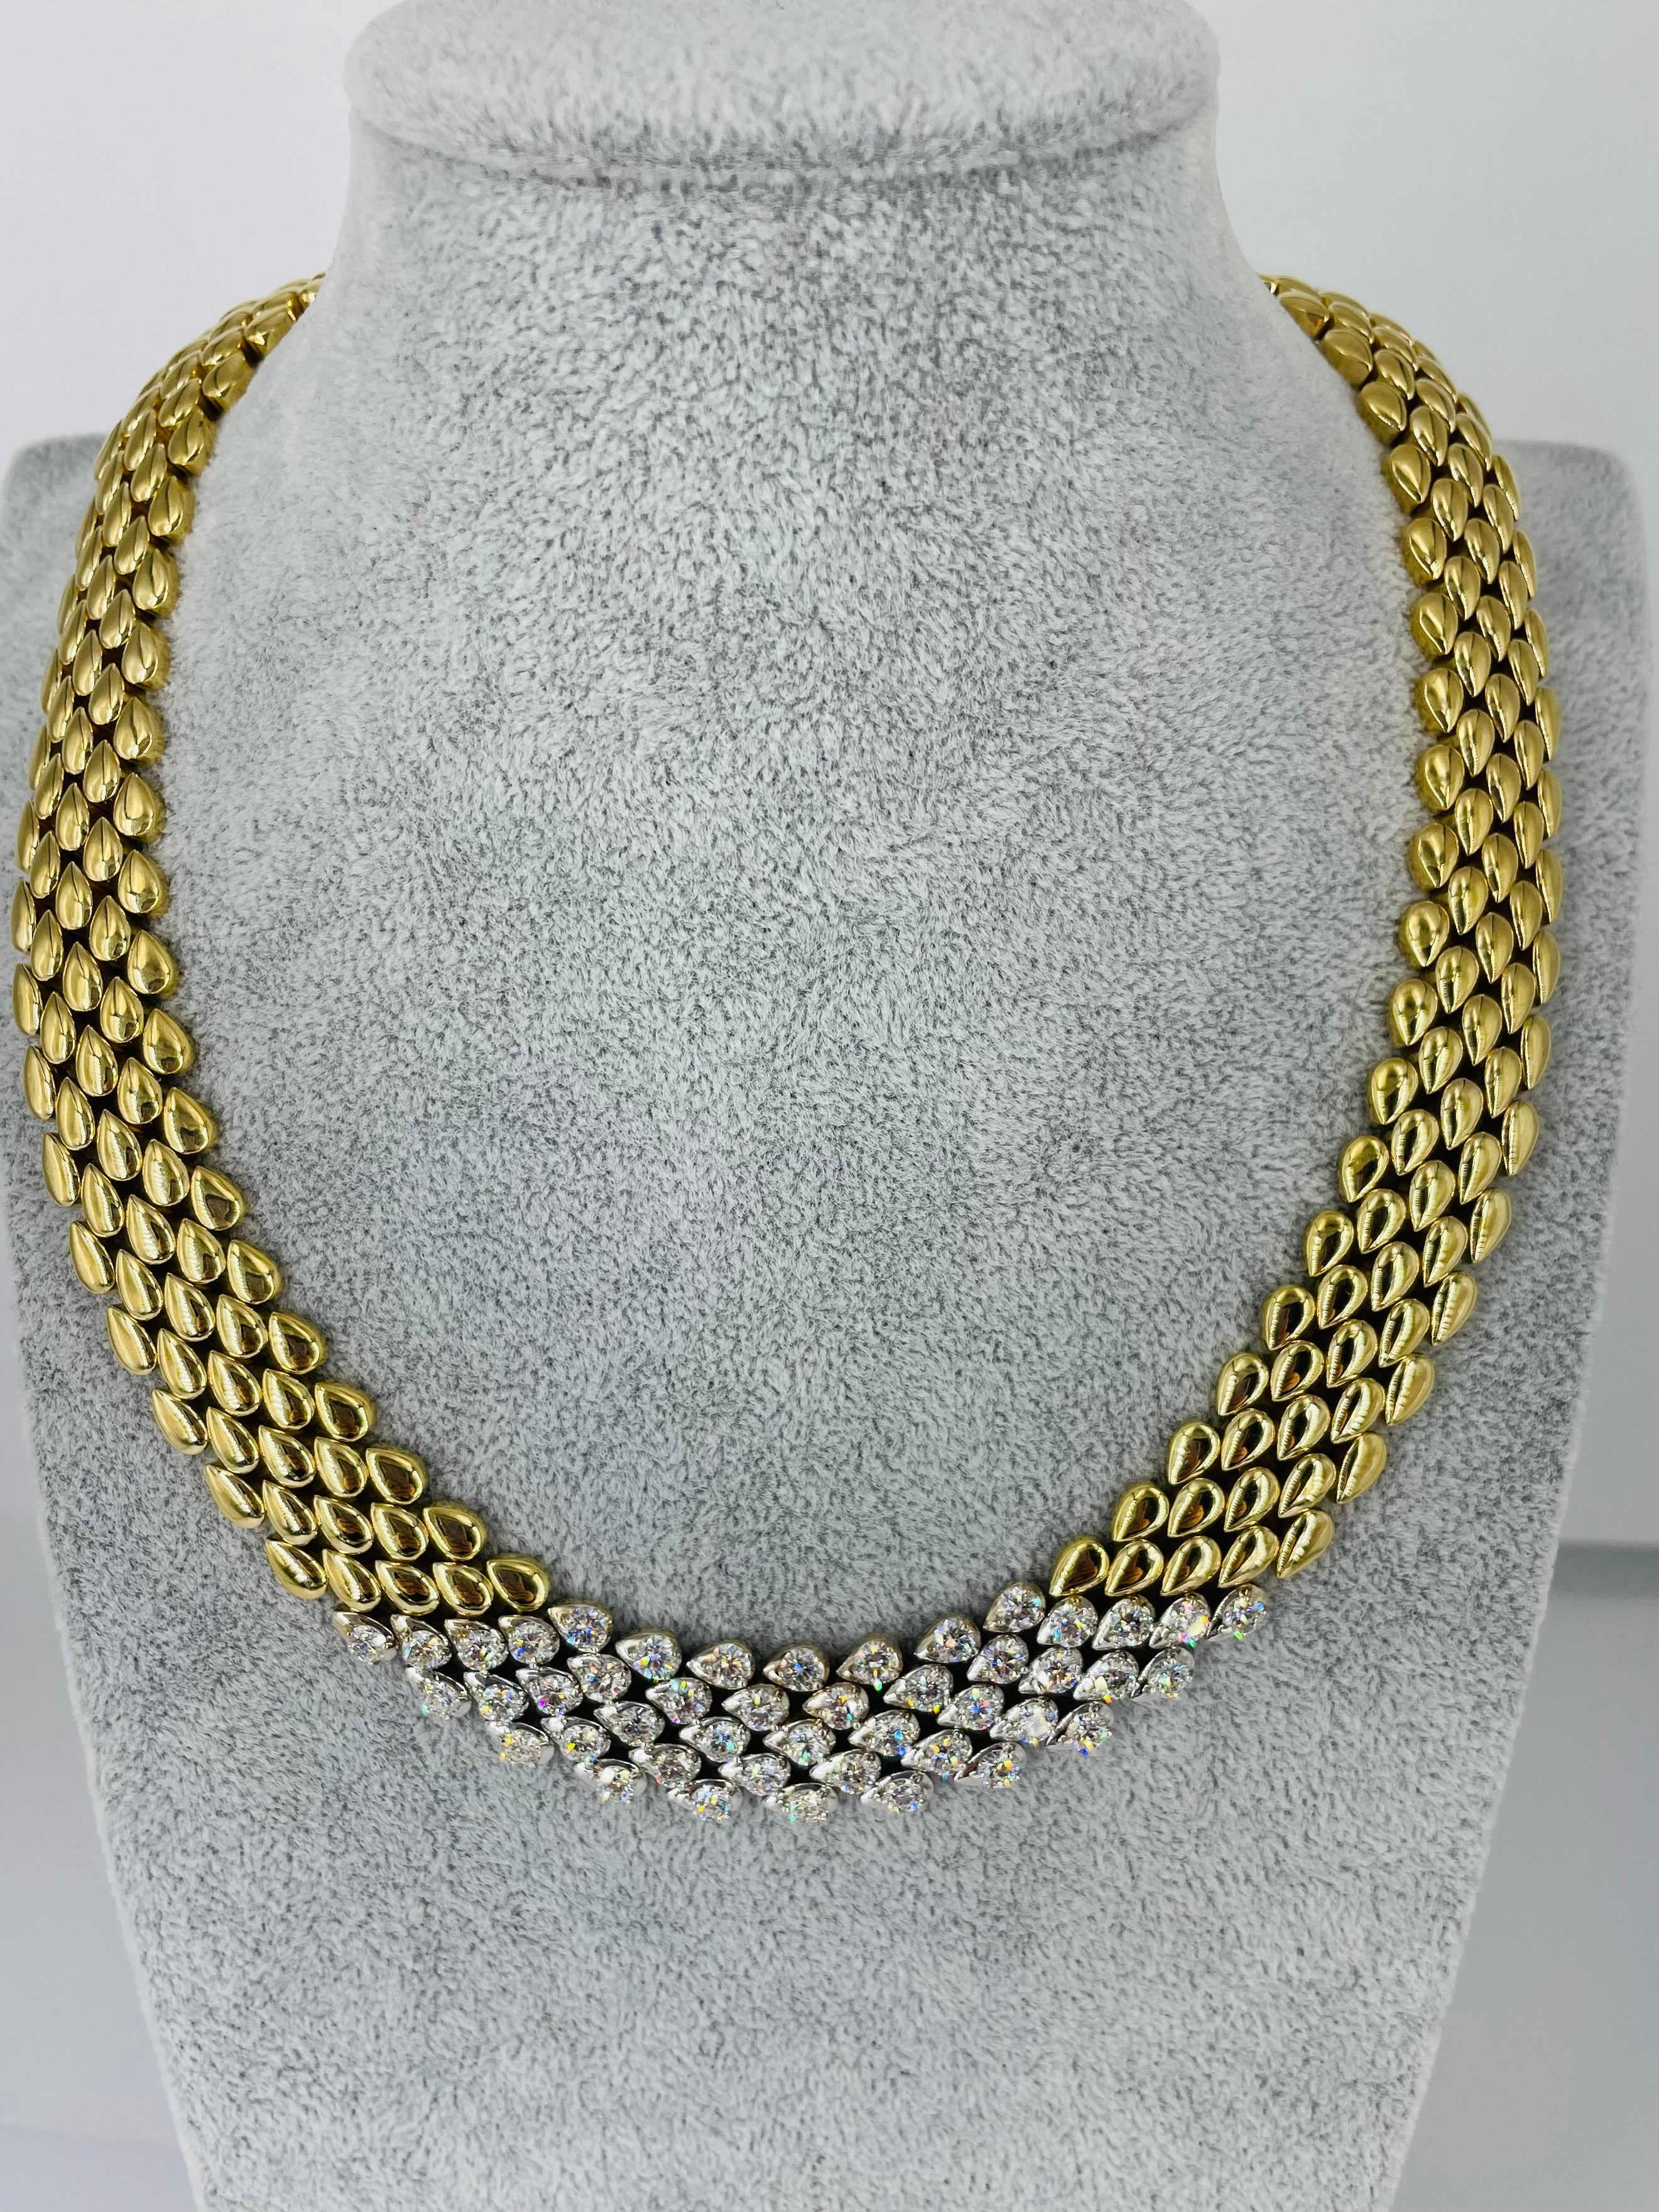 This sophisticated choker necklace is the perfect day to night statement piece. Five rows of pear shaped gold links create a bold textured look. At the center of the necklace the links transition to white gold set with round diamonds, total 8.25